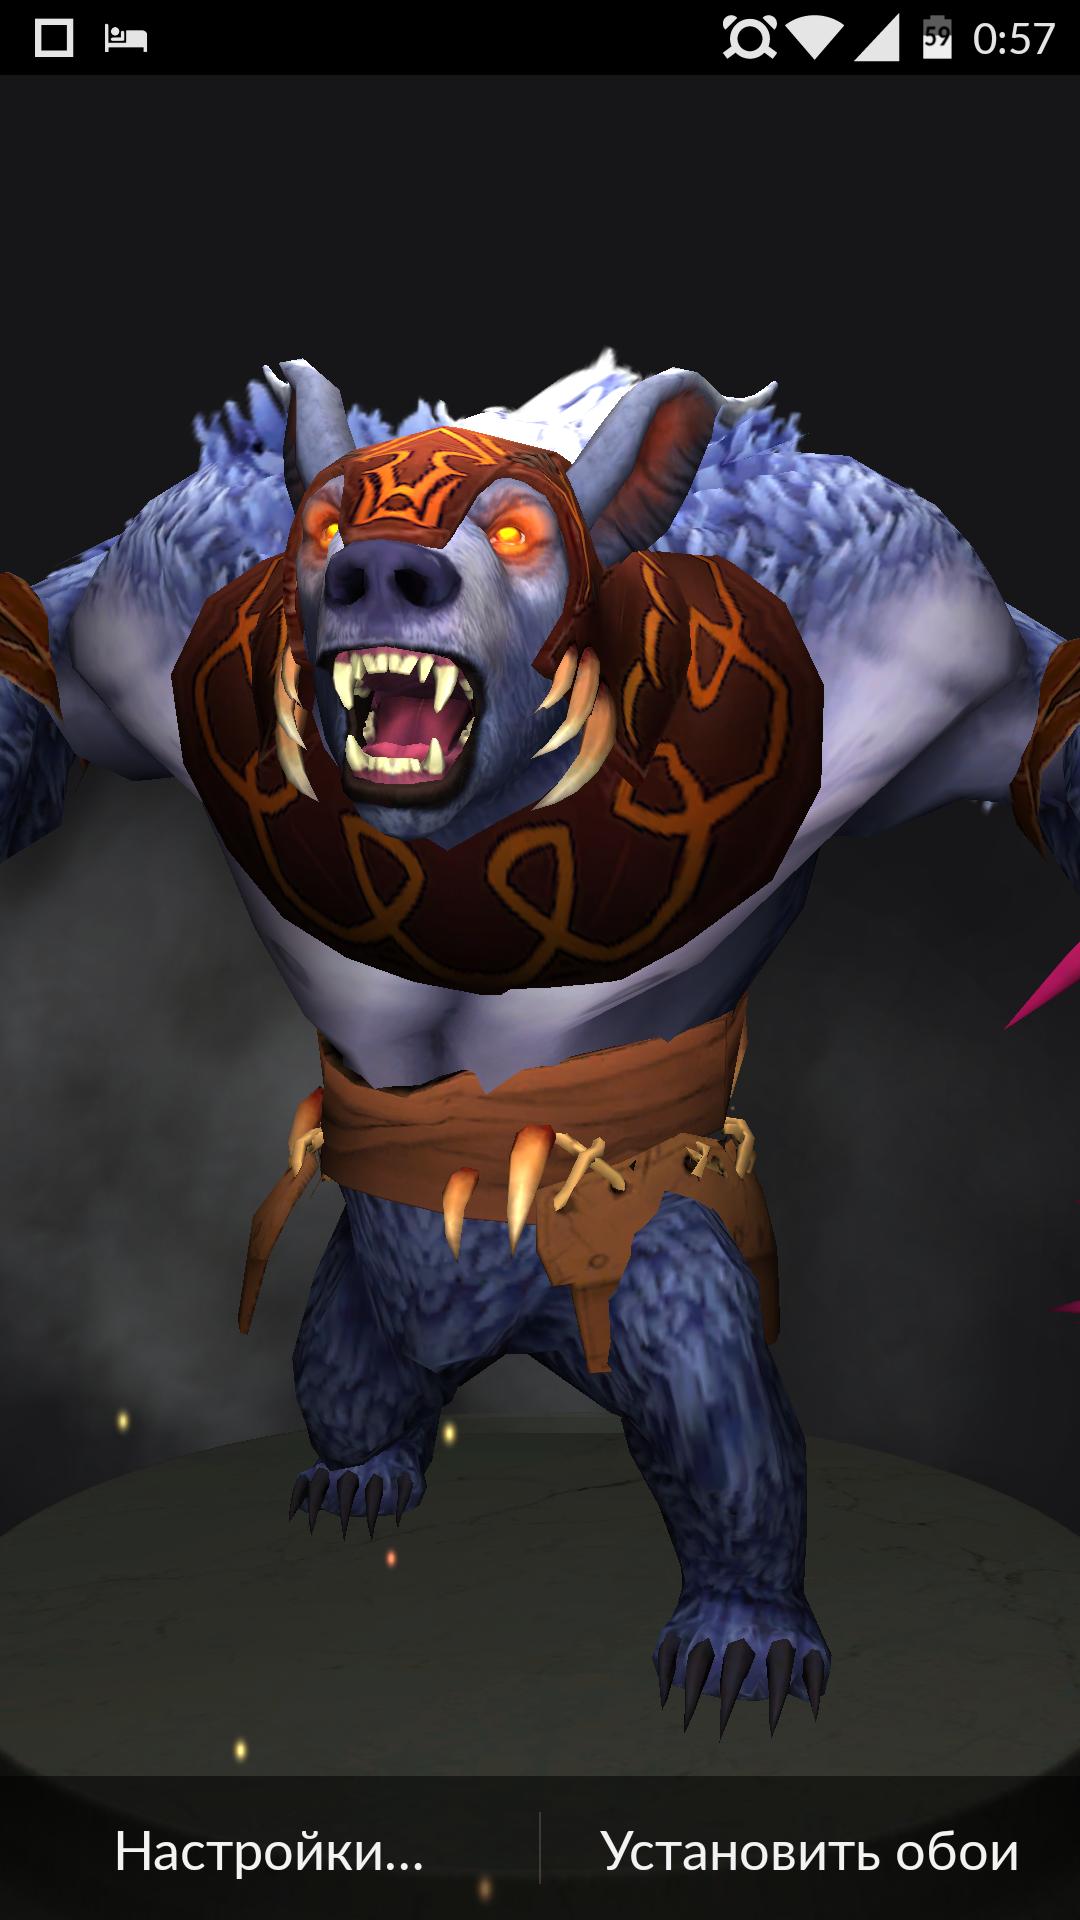 dota 2 live wallpaper,cartoon,illustration,fictional character,animation,grizzly bear